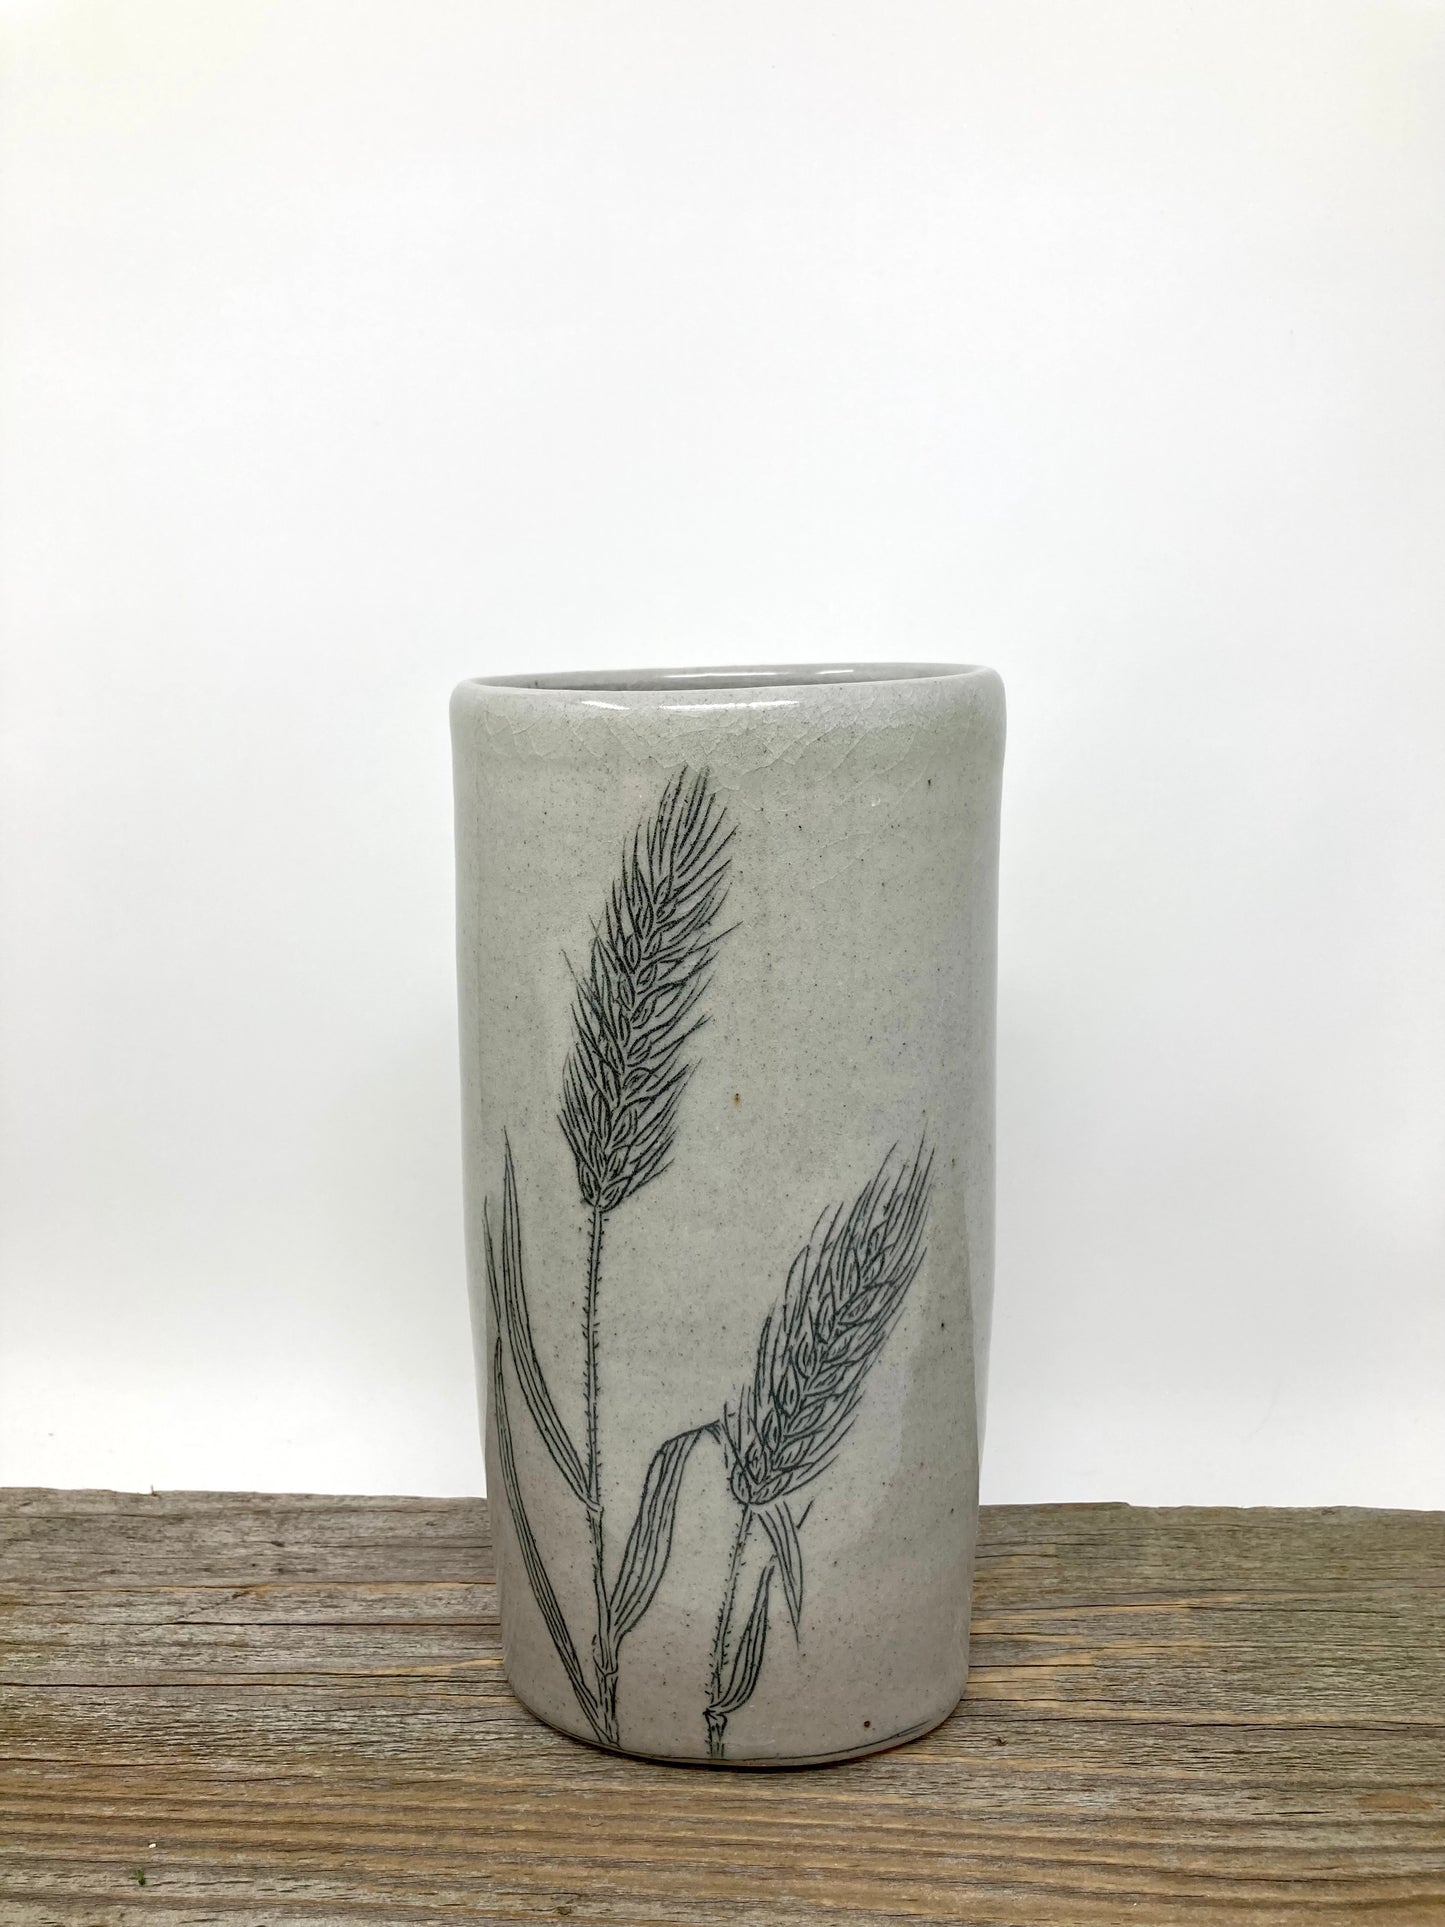 "A Leaf Of Grass" Wild Wheat Poetry Vase